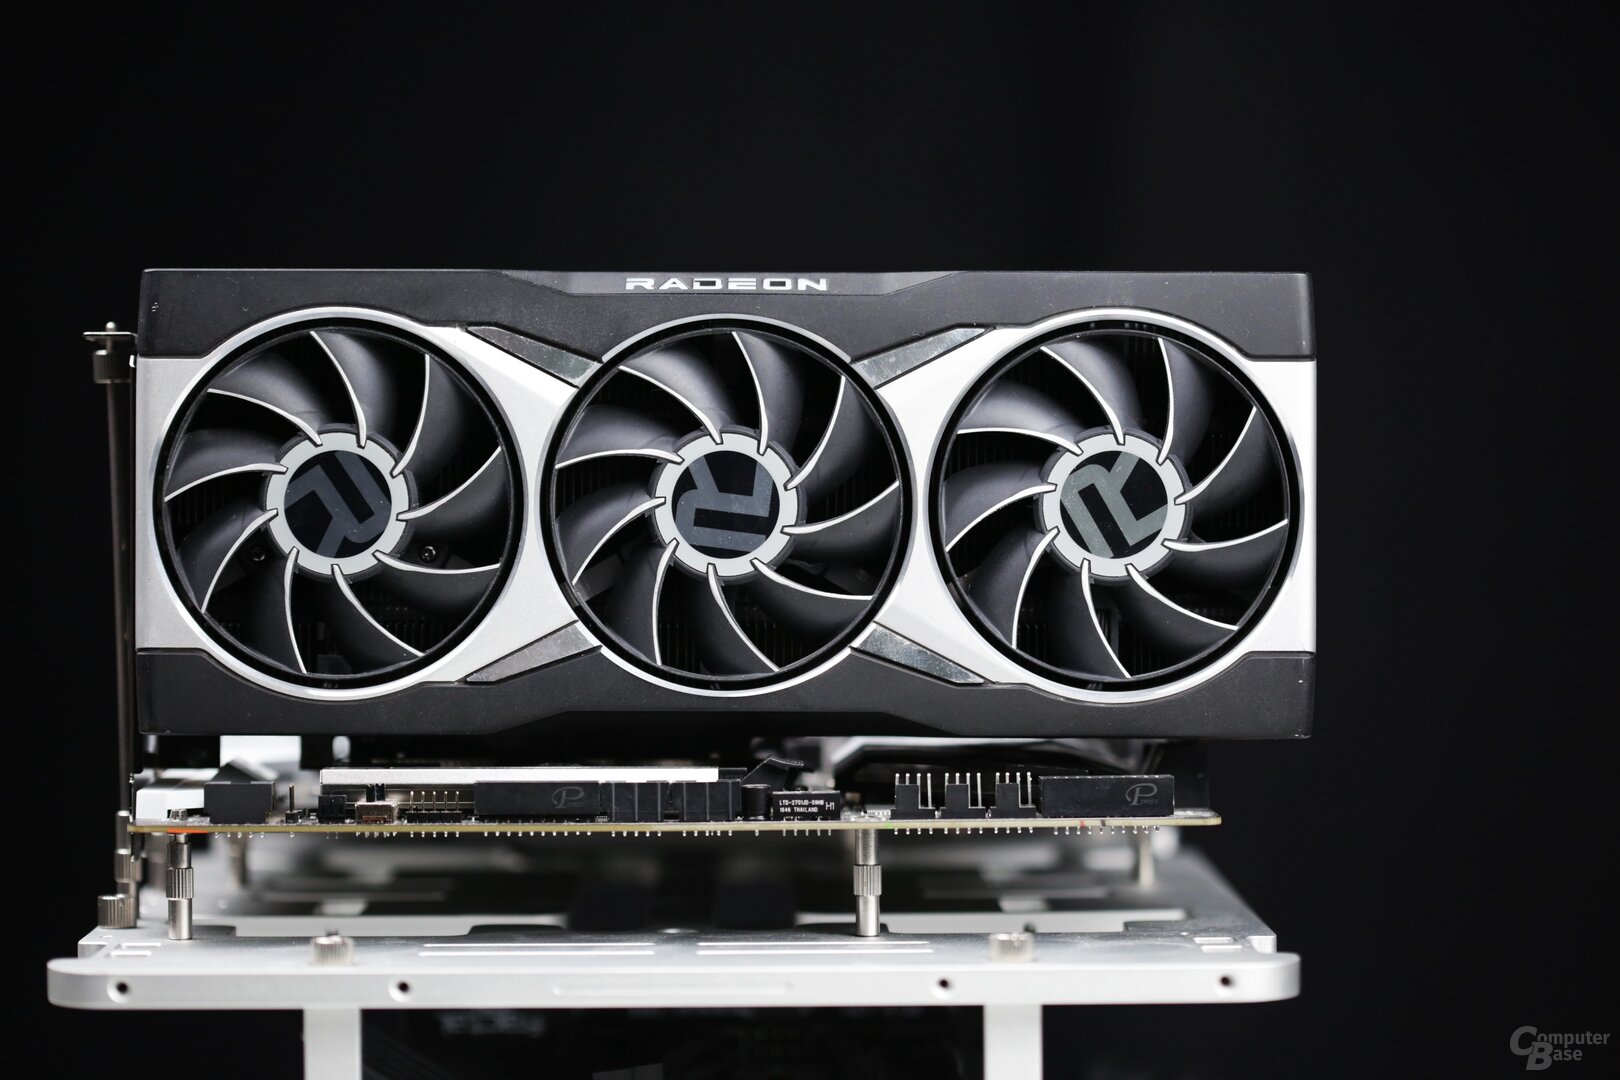 The AMD Radeon RX 6800 in the reference design